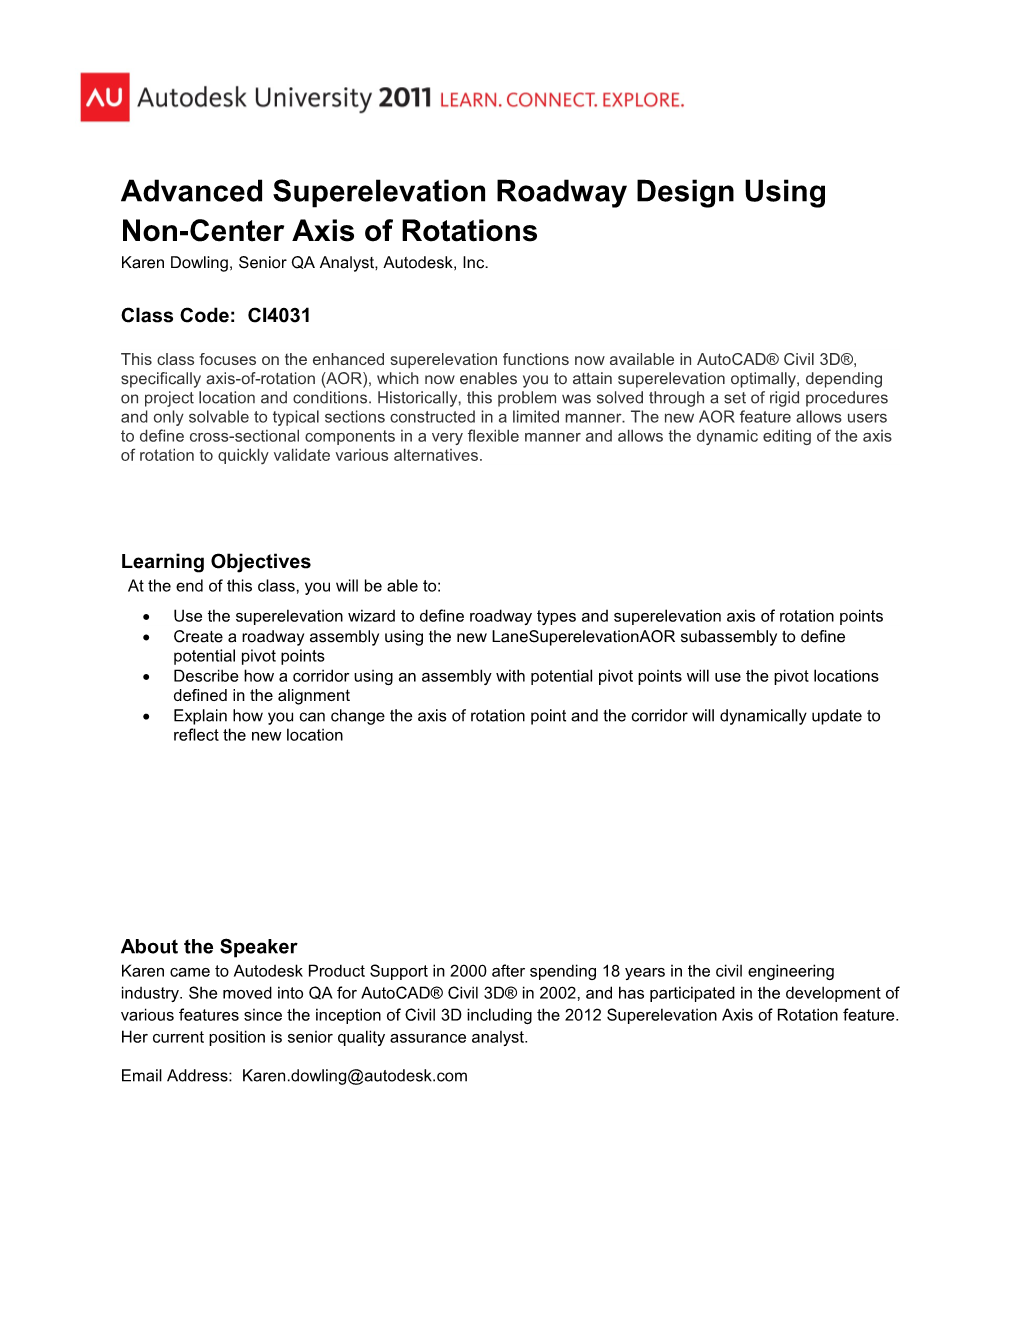 Advanced Superelevation Roadway Design Using Non-Center Axis of Rotations